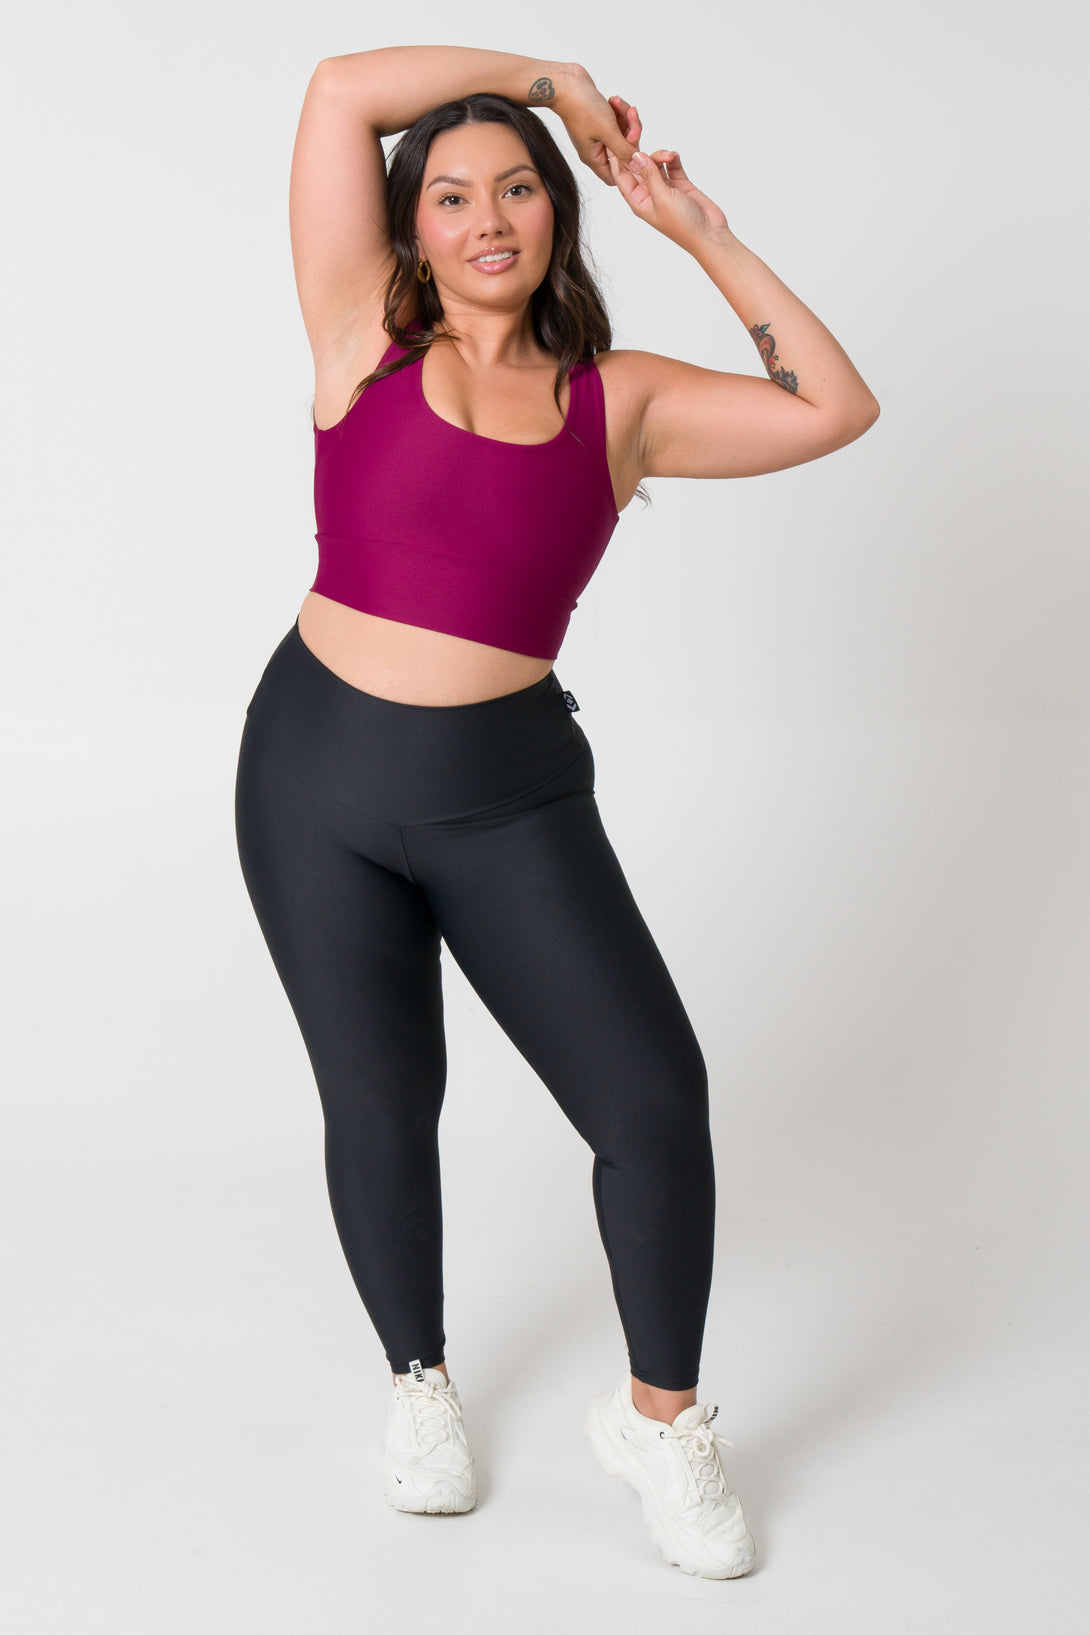 Berry scoop neck comfort crop top, offering both comfort and style for active women during workouts or casual wear."